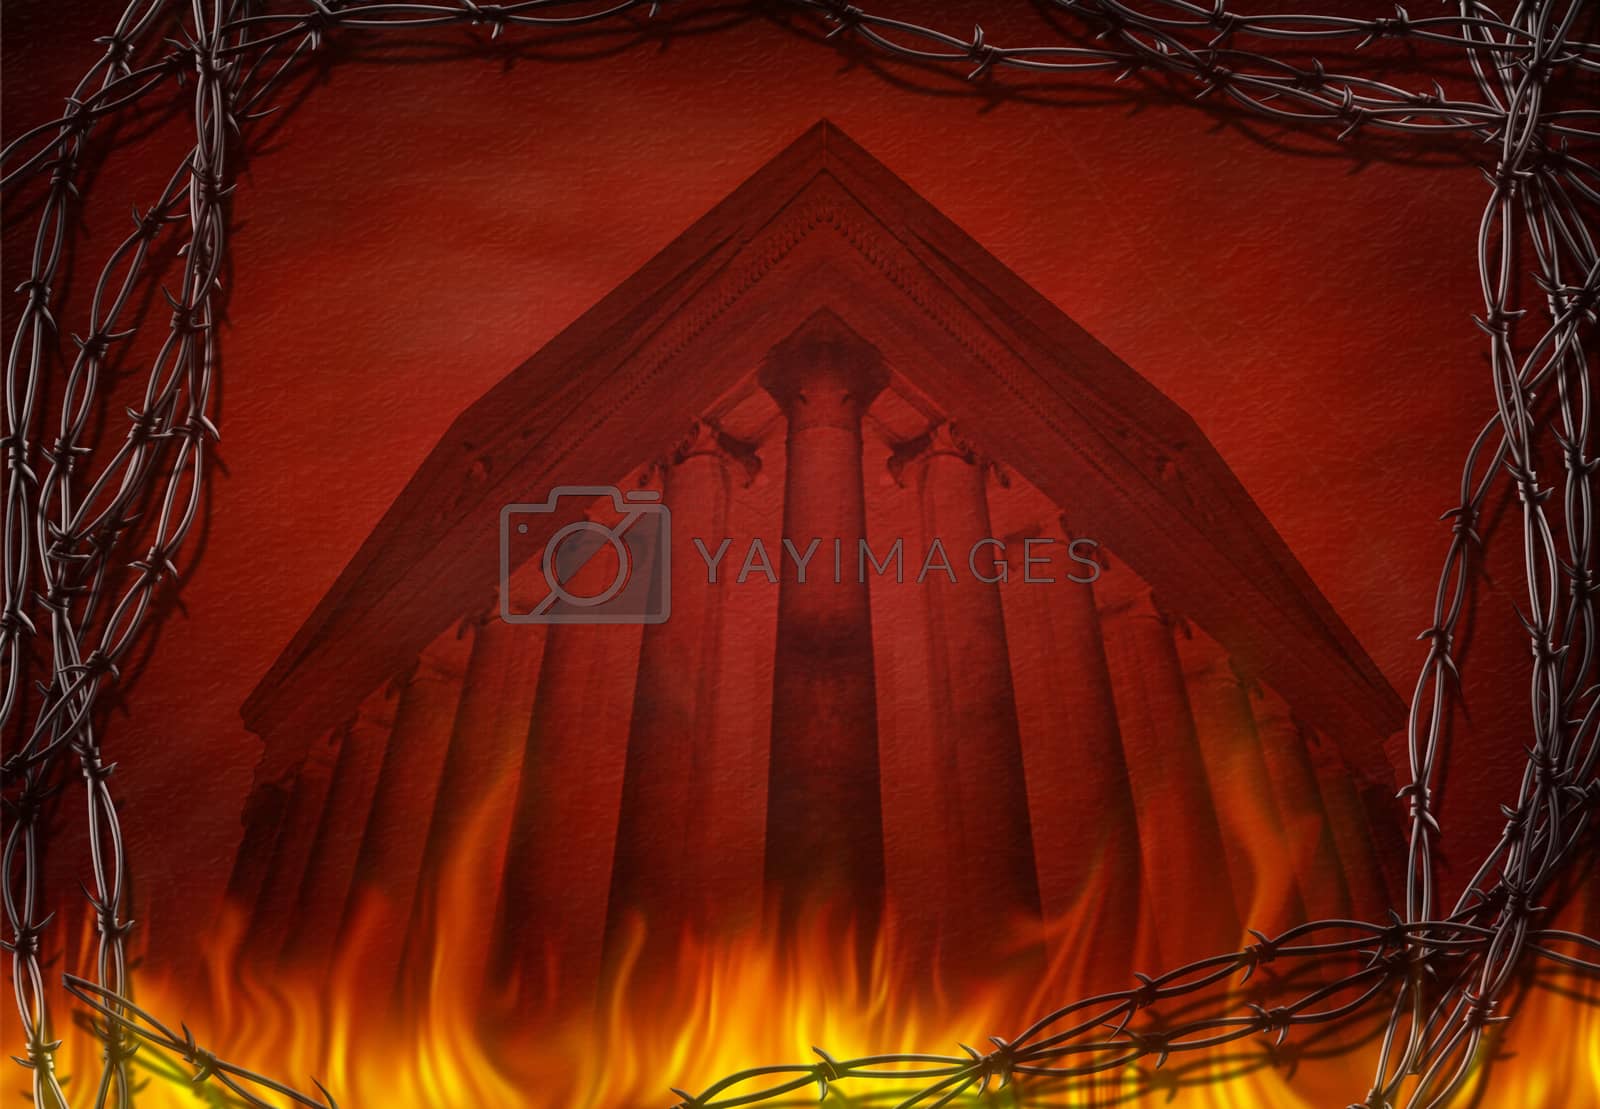 Royalty free image of Burden Temple by applesstock